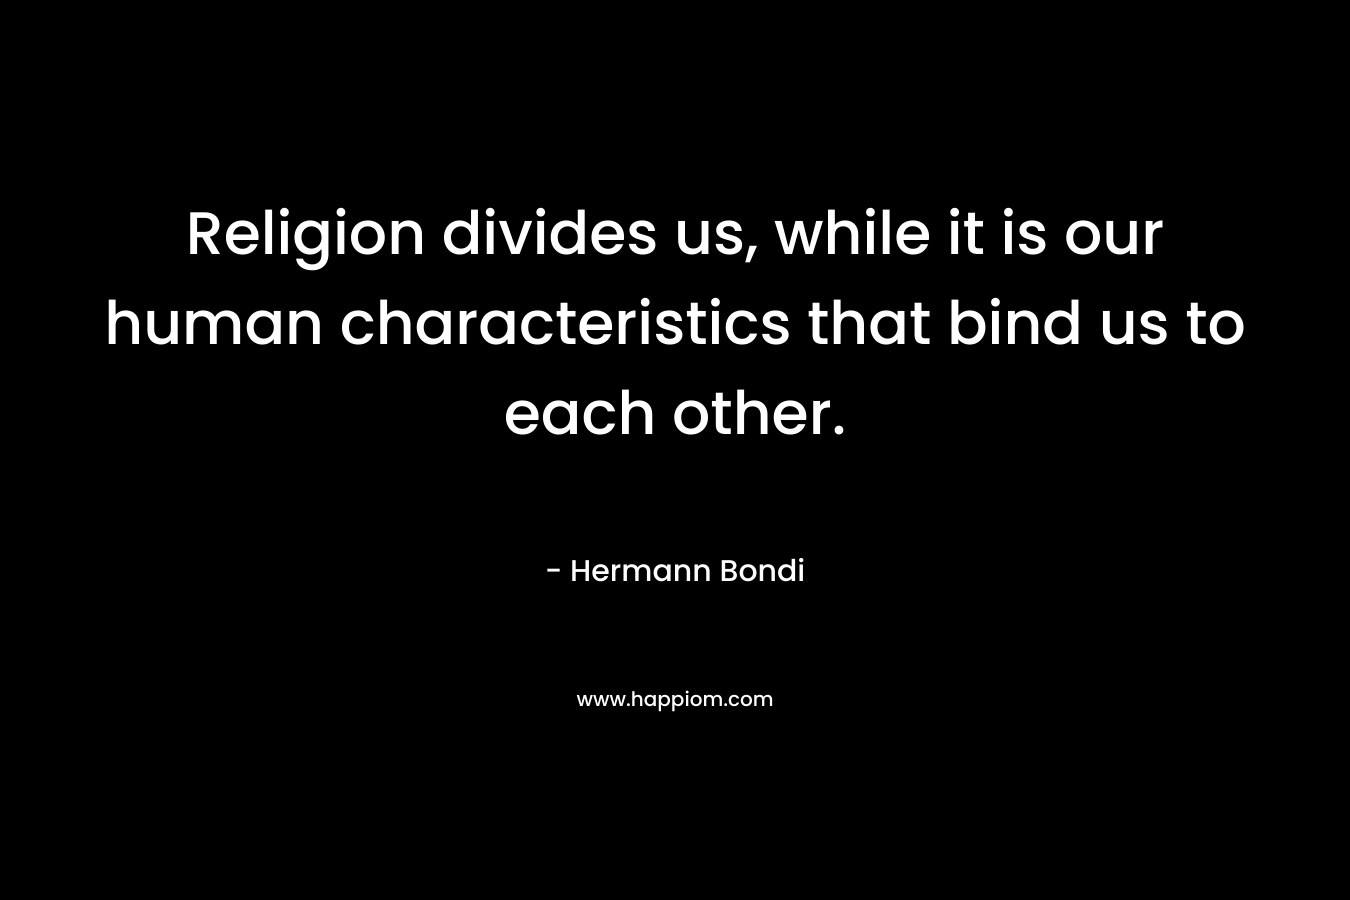 Religion divides us, while it is our human characteristics that bind us to each other. – Hermann Bondi